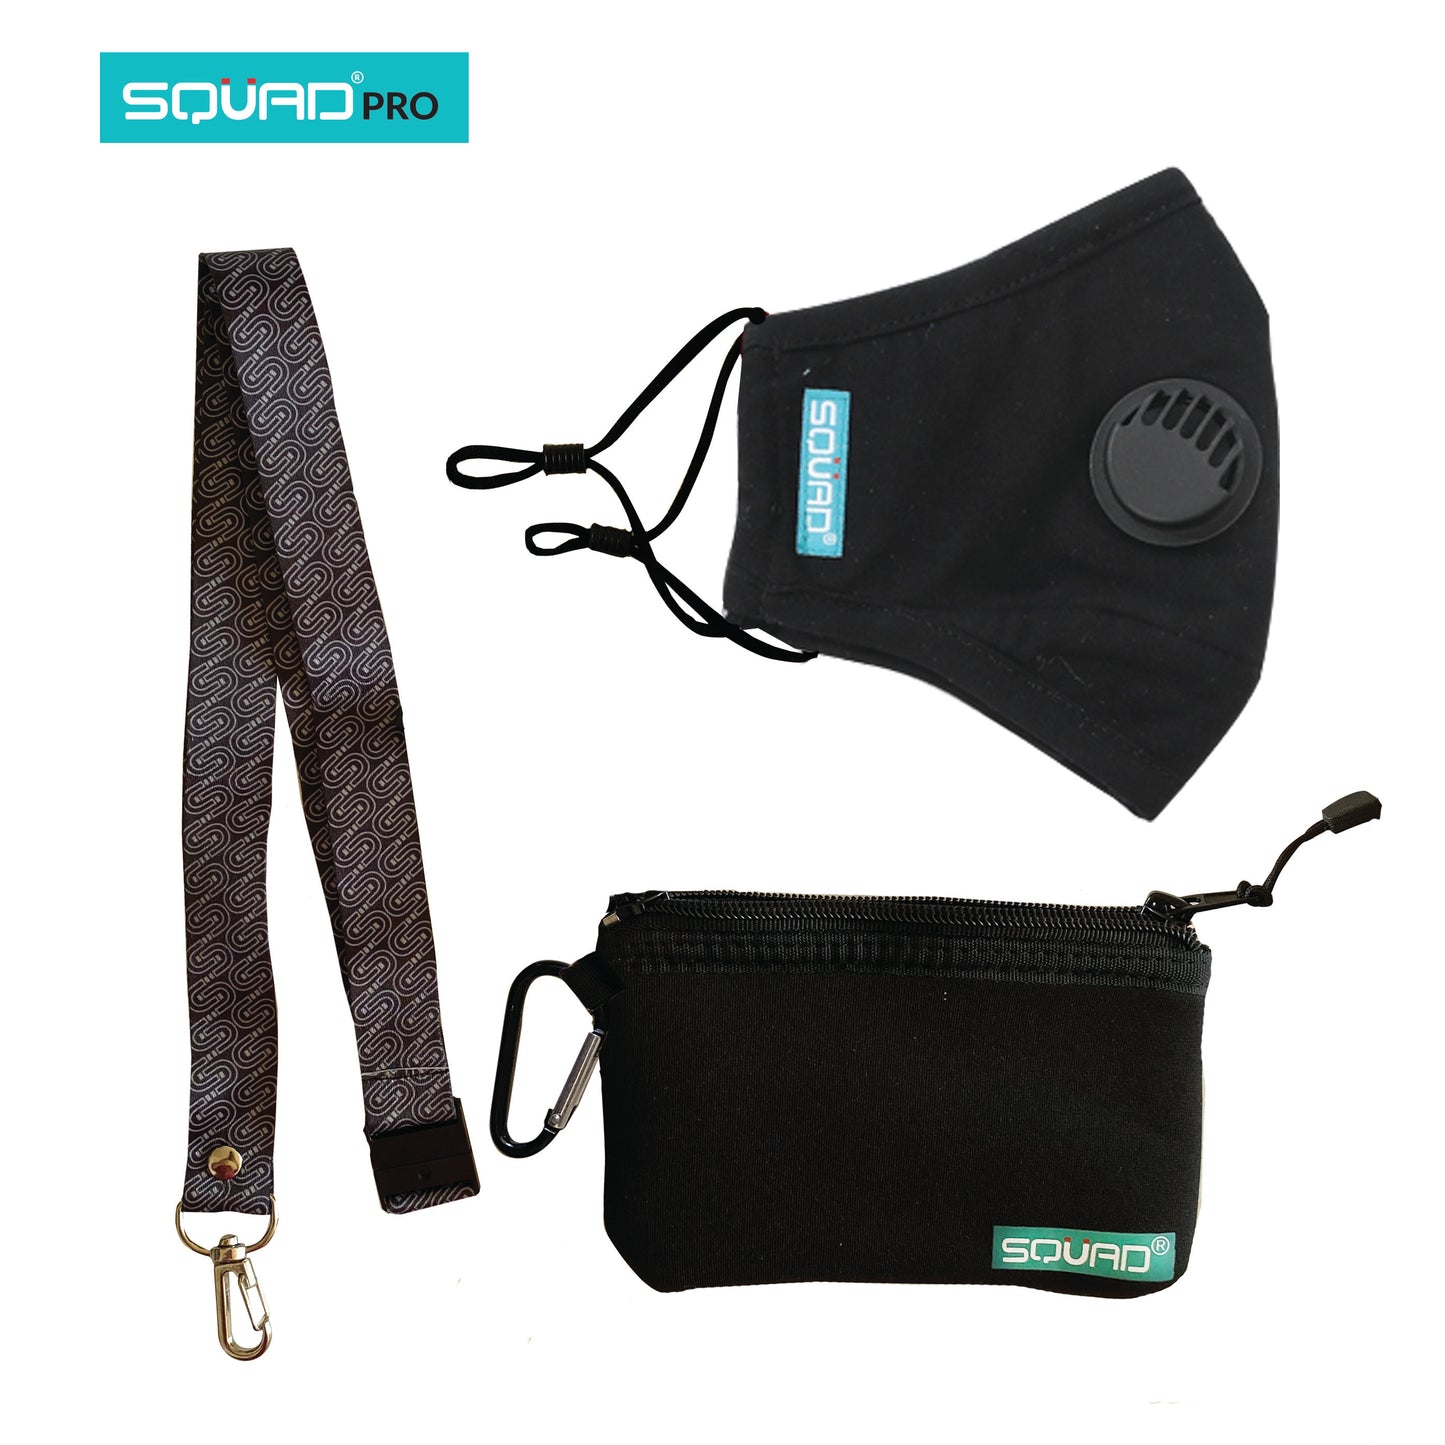 Reusable and Washable Masks. Comes with a Neoprene pouch, carabiner and lanyard for easy storage and mobility